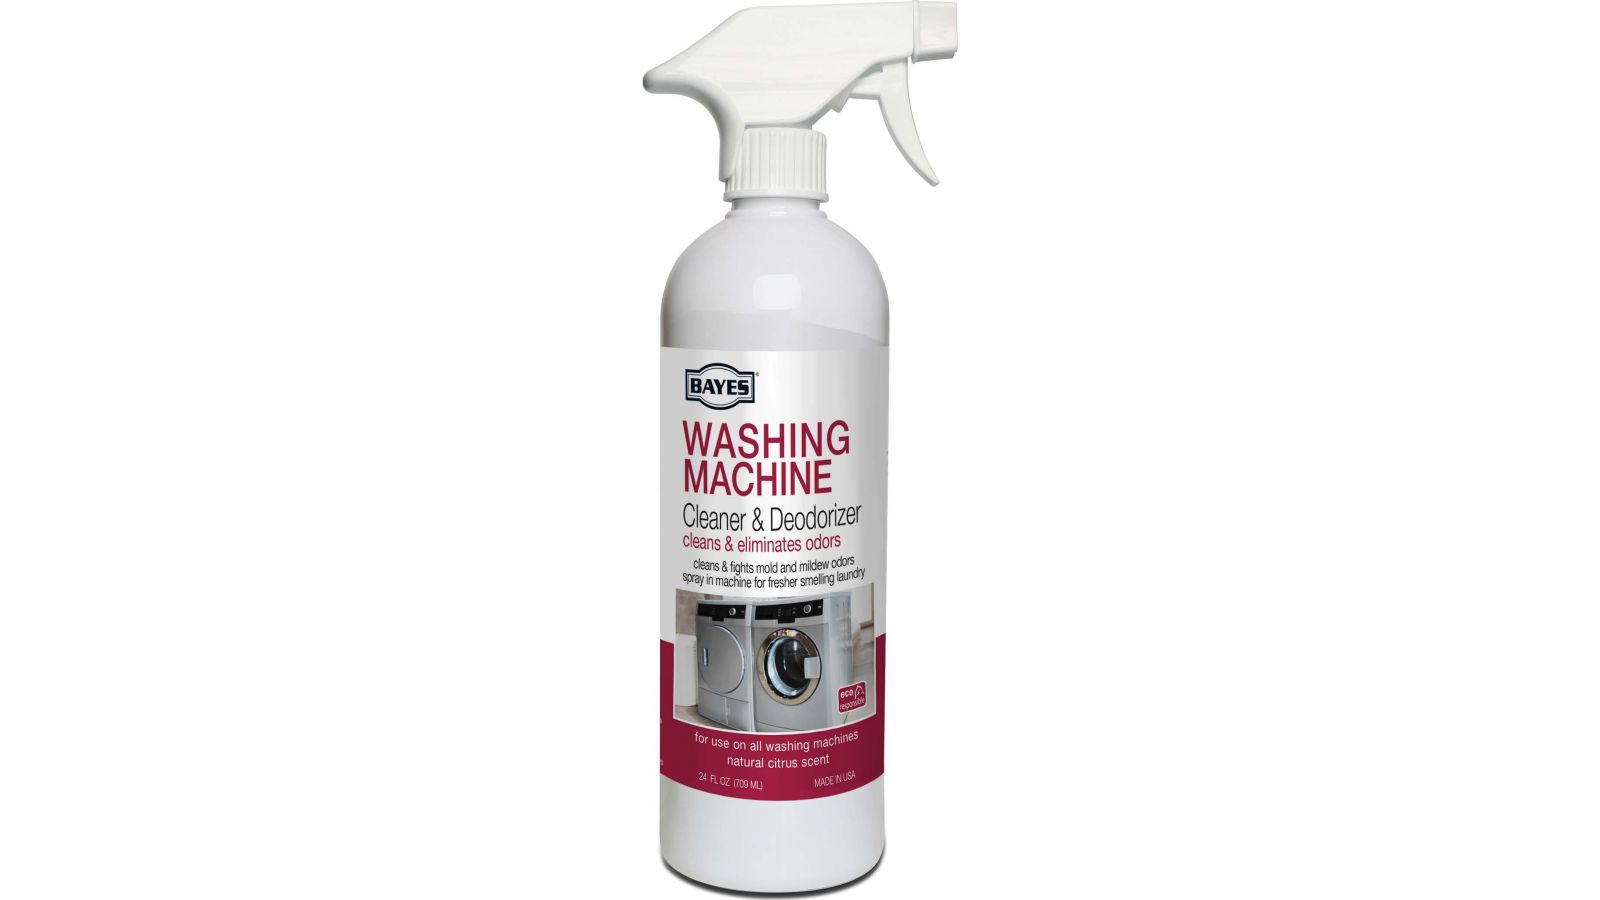 Bayes Washing Machine Cleaner & Deodorizer - Cleans and Eliminates Mold and Mildew Odors for Fresh Smelling Laundry